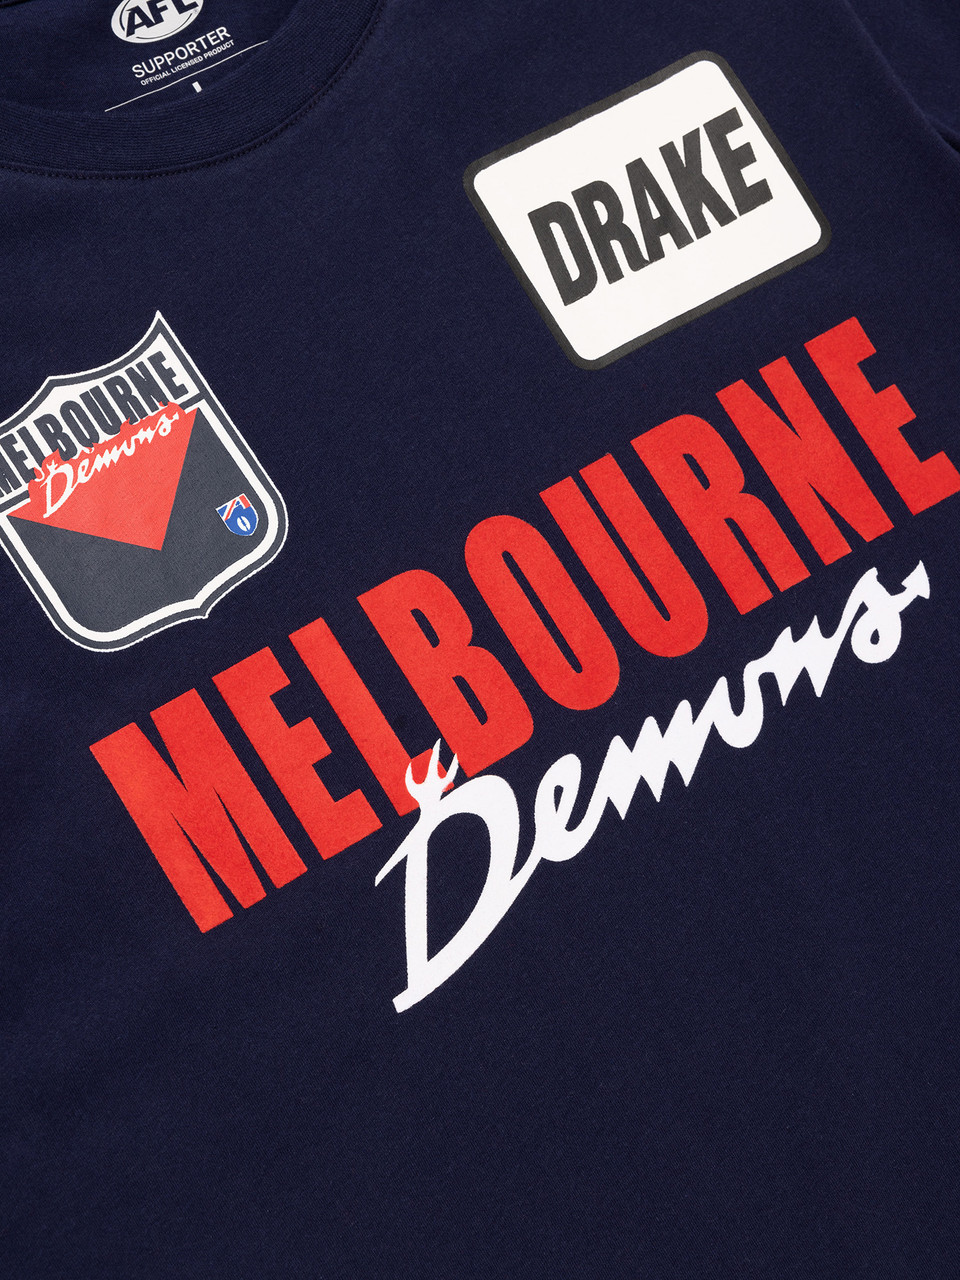 Melbourne Demons Throwback Graphic Tee - Melbourne Football Club